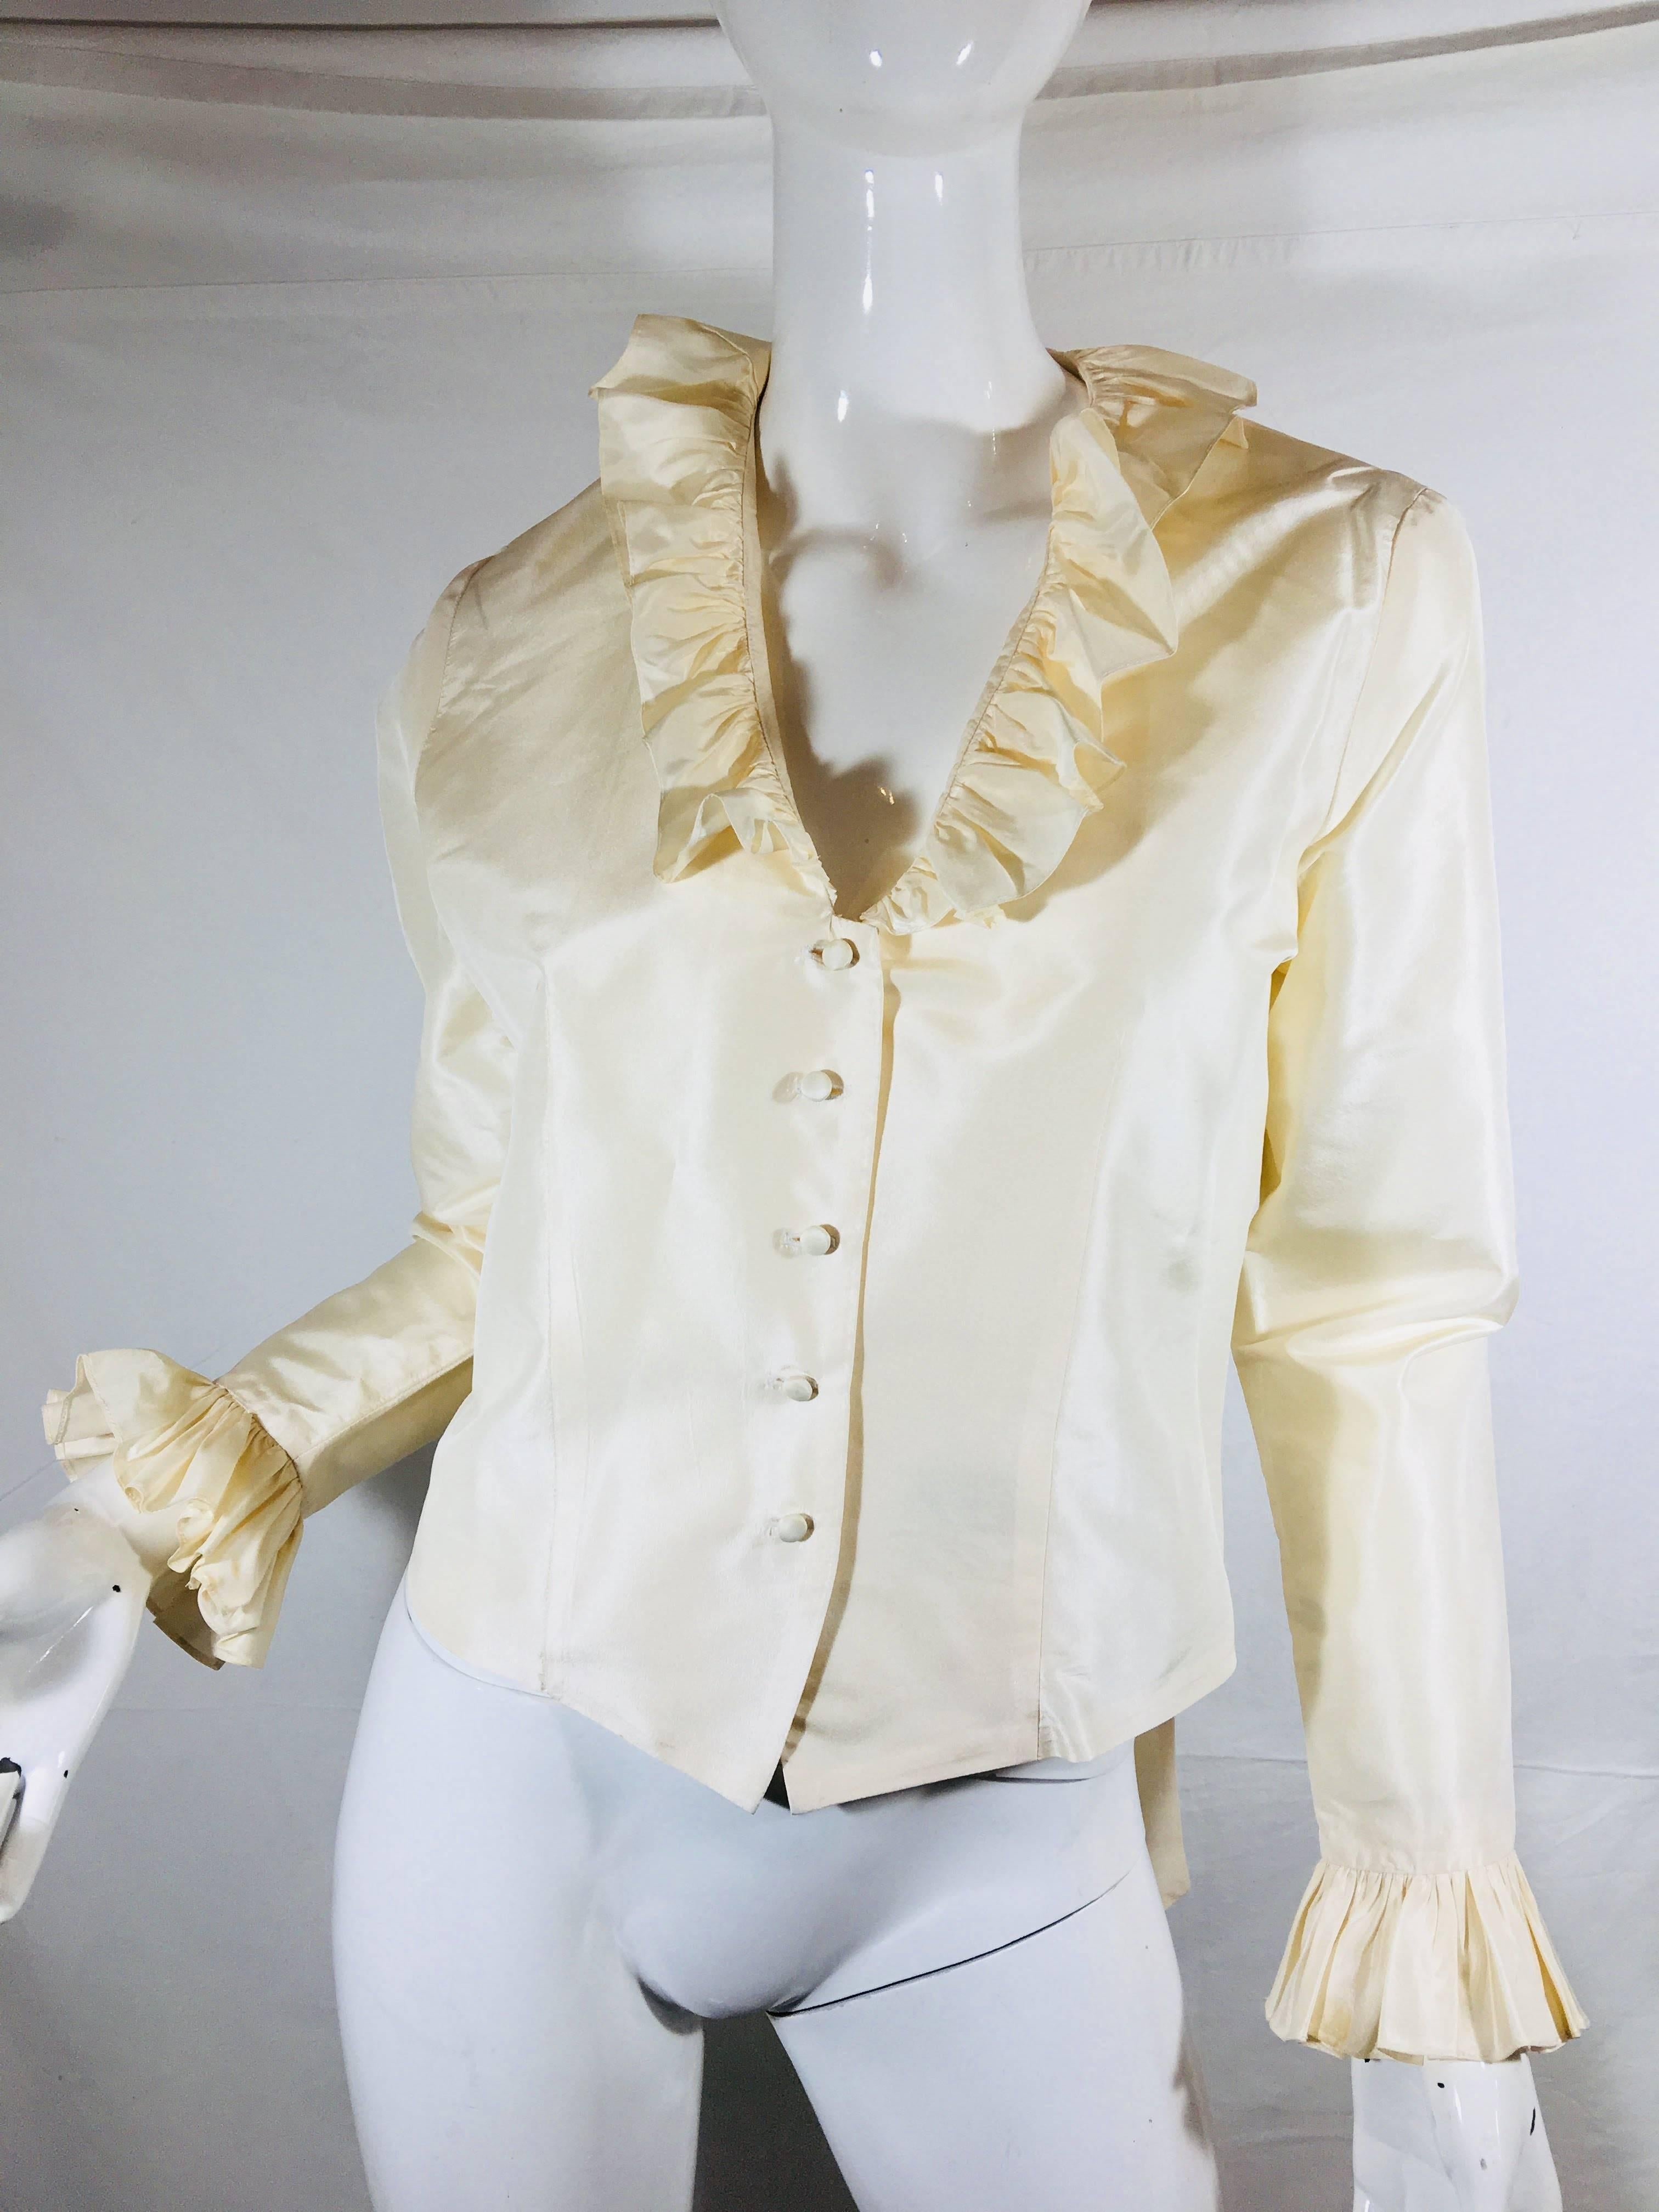 San Francisco Silk Button Up Blouse with Ruffle Collar and Cuffs and Tie Back.